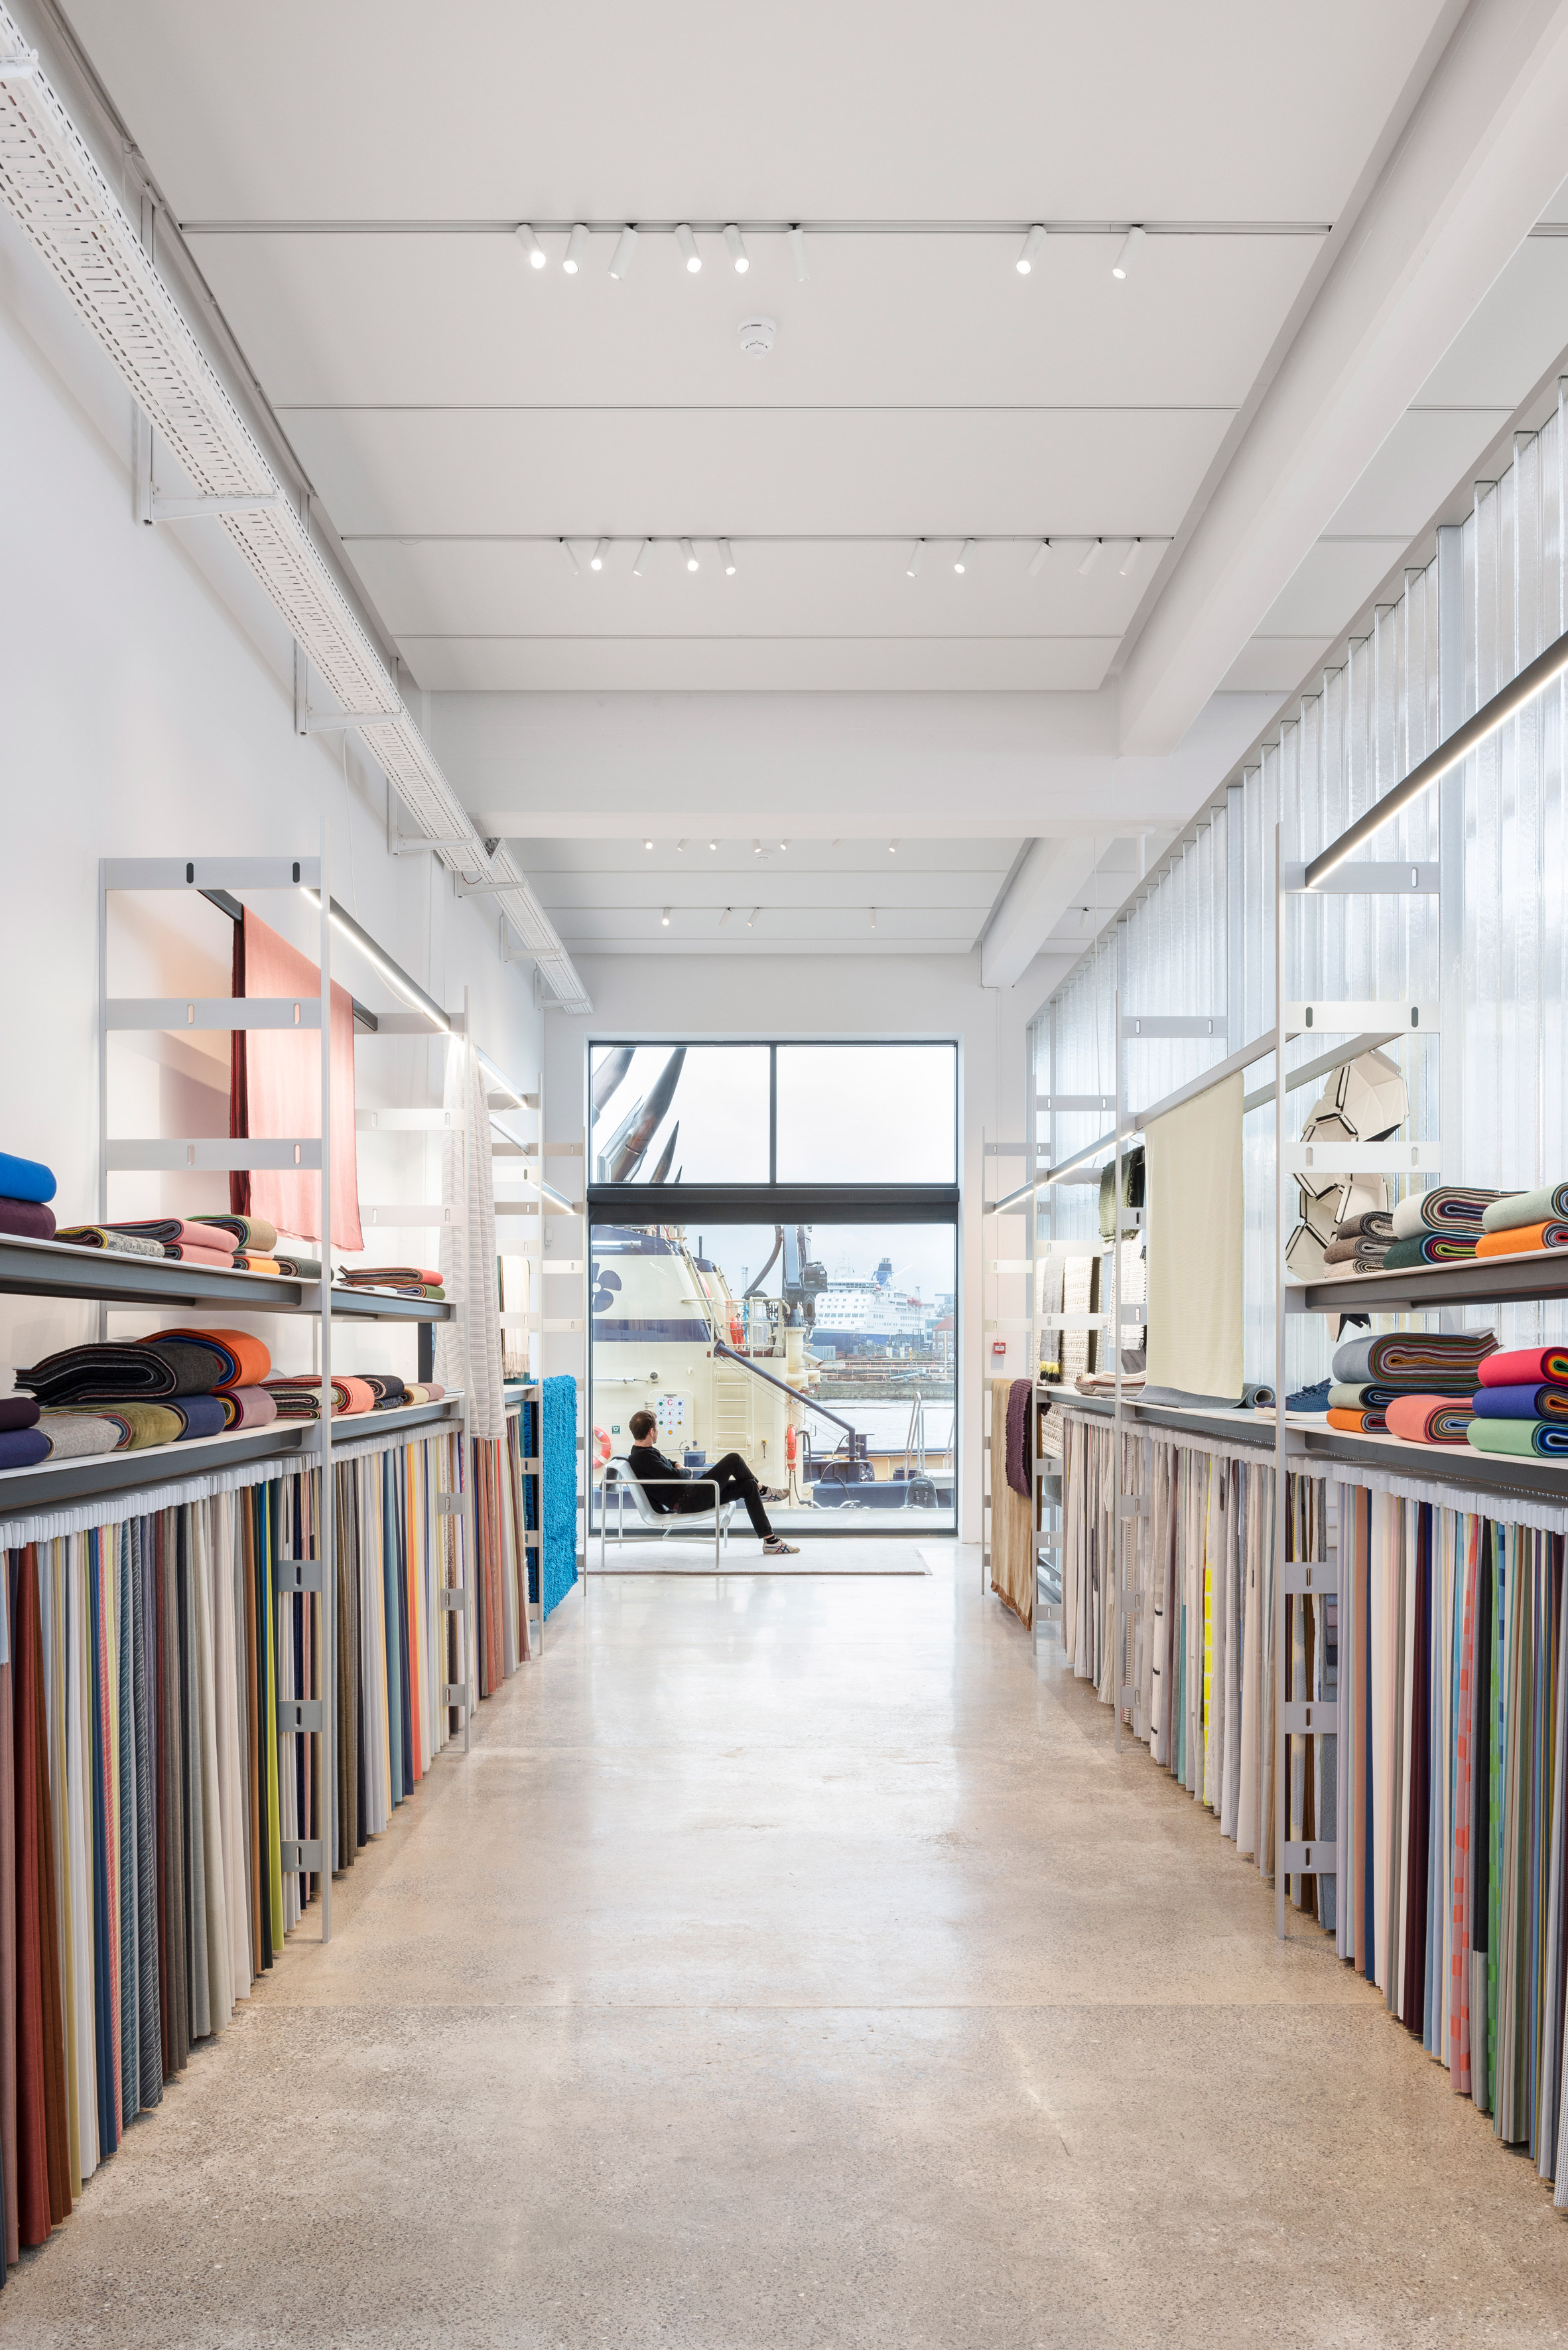 Kvadrat showroom by Bouroullec brothers